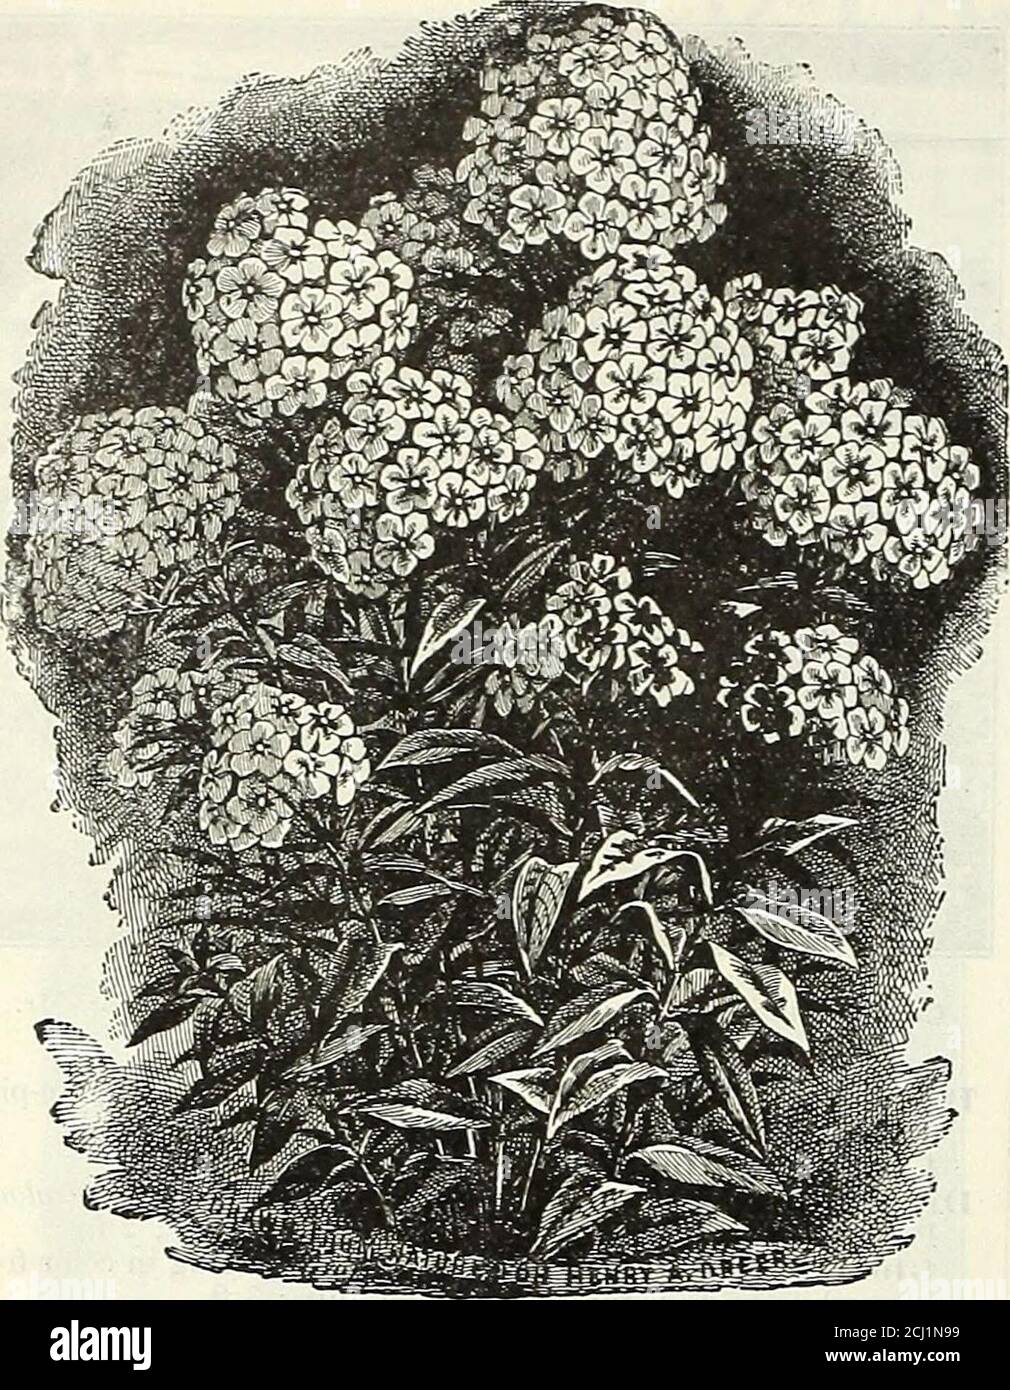 . Dreer's autumn 1904 catalogue . urge). Umbels of white flowers; June to August; 18 in.Gaillardia GrandiHora (Blanket Floxver). One of the showiest hardy perennials, blooming throughout the entire season; large, gorgeous flowers of crimson and gold ; 2 ft.Geranium Sanguinetim {Cranes Bill). Bi-ight crimson flowers all summer; 18 inches. Sanguineum Album. Pure white.Glechoma, or Nepeta ( Variegated Groundsel, or Ground Tin/). A valuable variegated creeper for rockery. 10 cts. each; $1.00 per doz.Gypsophila Paniculata (Jiabys Breath). Large panicles of minute white flowers in August and Septemb Stock Photo